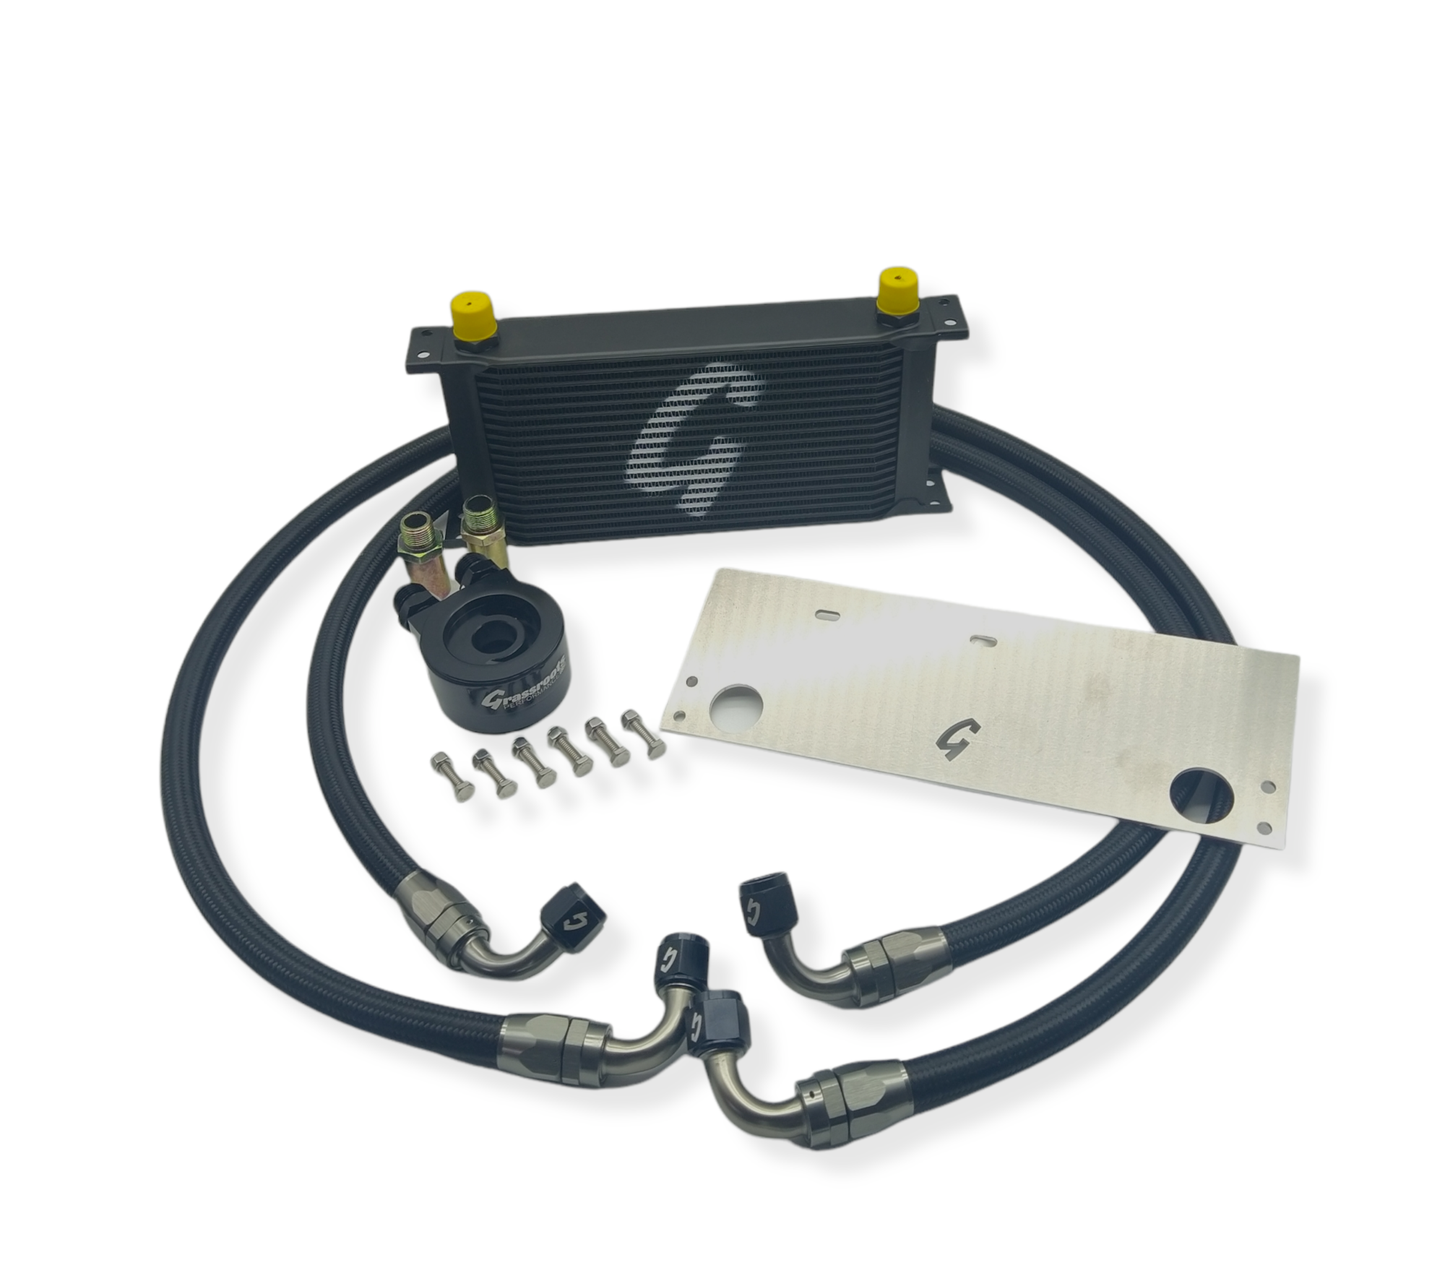 Grassroots Performance - FRS/BRZ/GT86 DIRECT-FIT 19-ROW OIL COOLER KIT